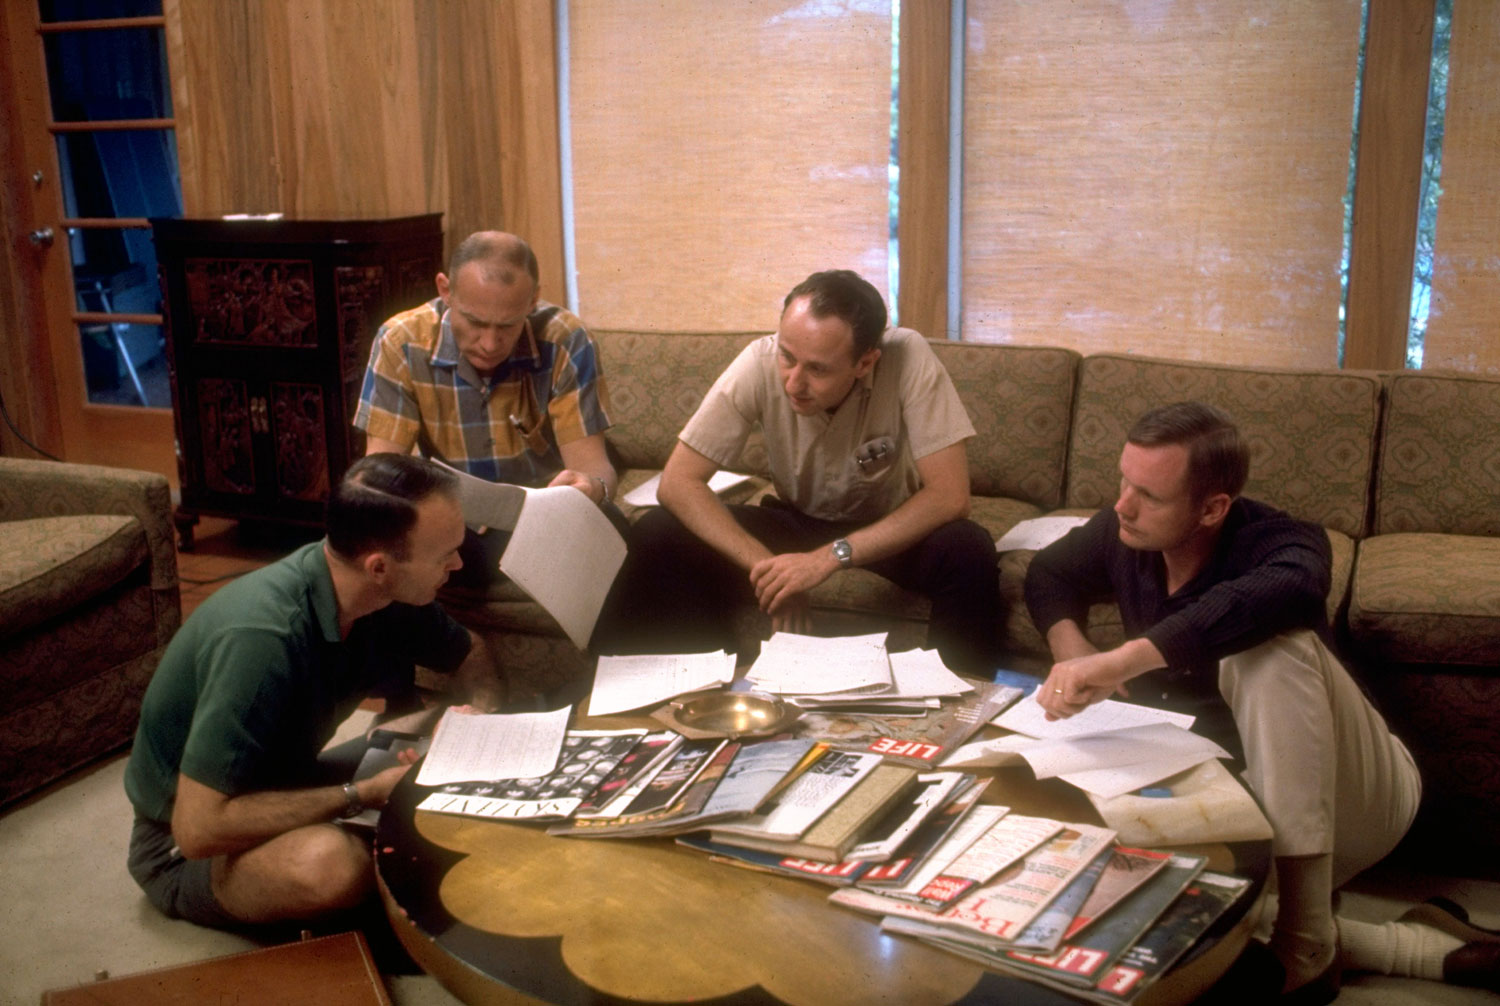 Not published in LIFE. The Apollo 11 astronauts discuss their upcoming moon mission with an engineer from Houston's Mission Control Center (second from right), Texas, 1969.